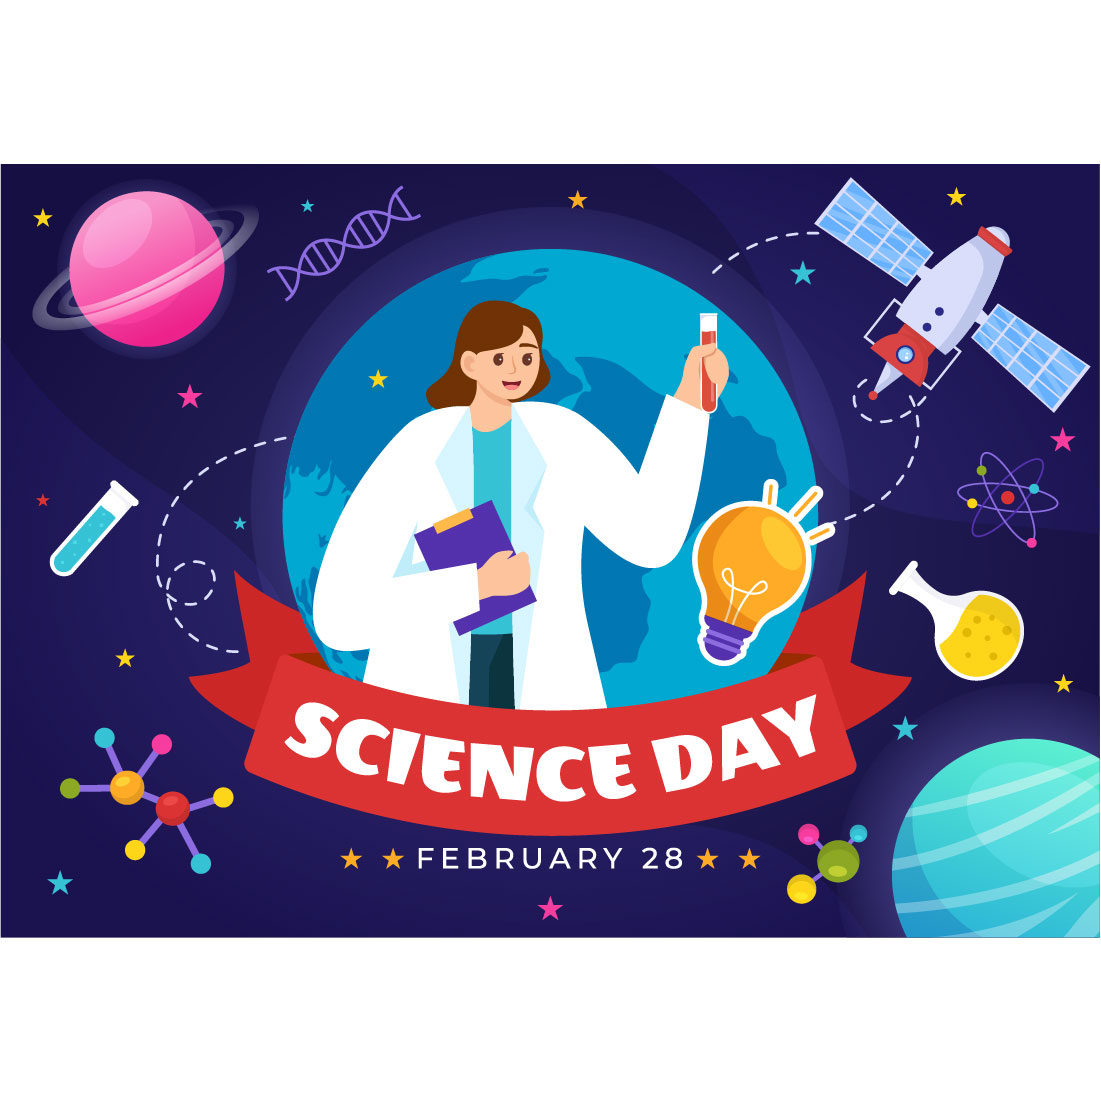 13 National Science Day Illustration cover image.